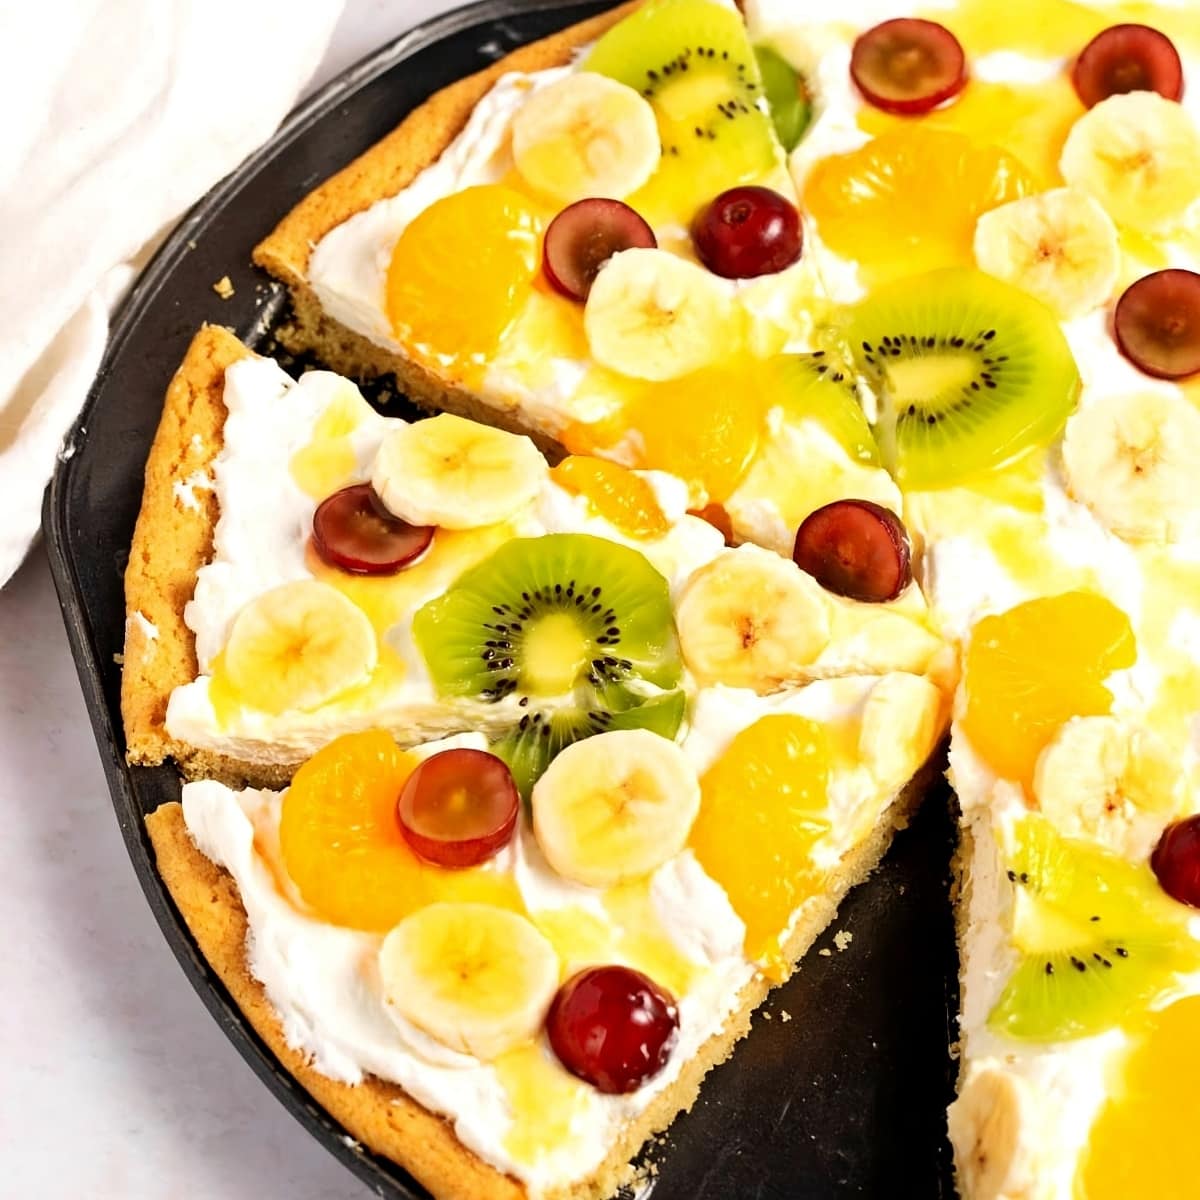 Fruit pizza in skillet pan topped with cream, kiwi, bananas, mandarin oranges, and grapes.